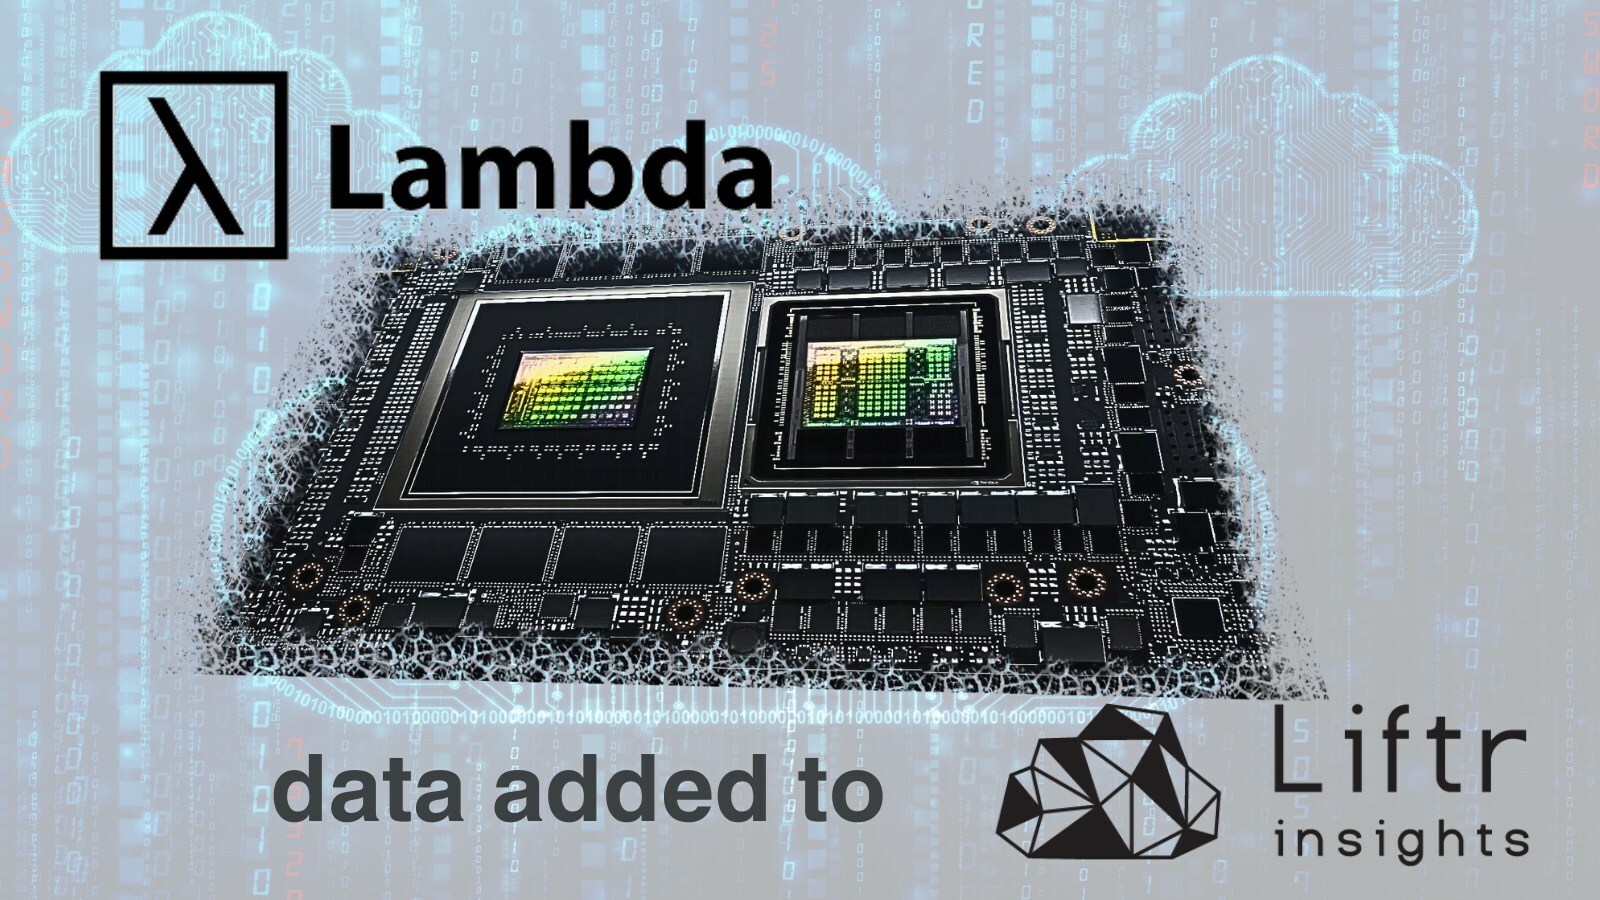 Liftr Insights adds Lambda Labs data to its data set covering clouds and semiconductors.